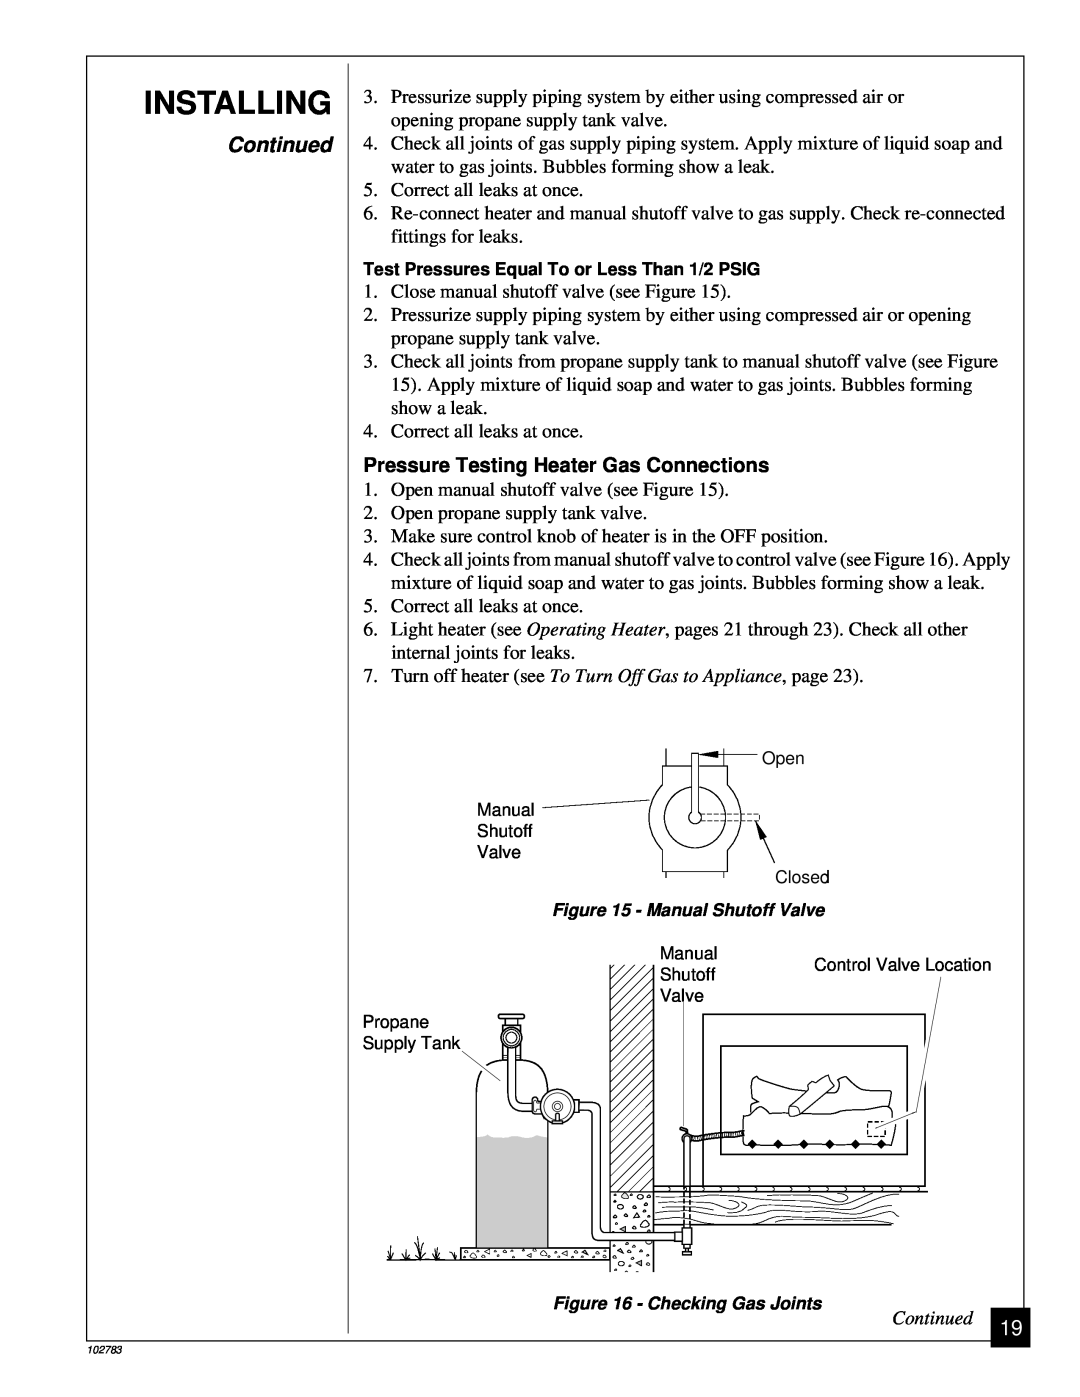 Desa 102783-01B installation manual Installing, Continued, Pressure Testing Heater Gas Connections 